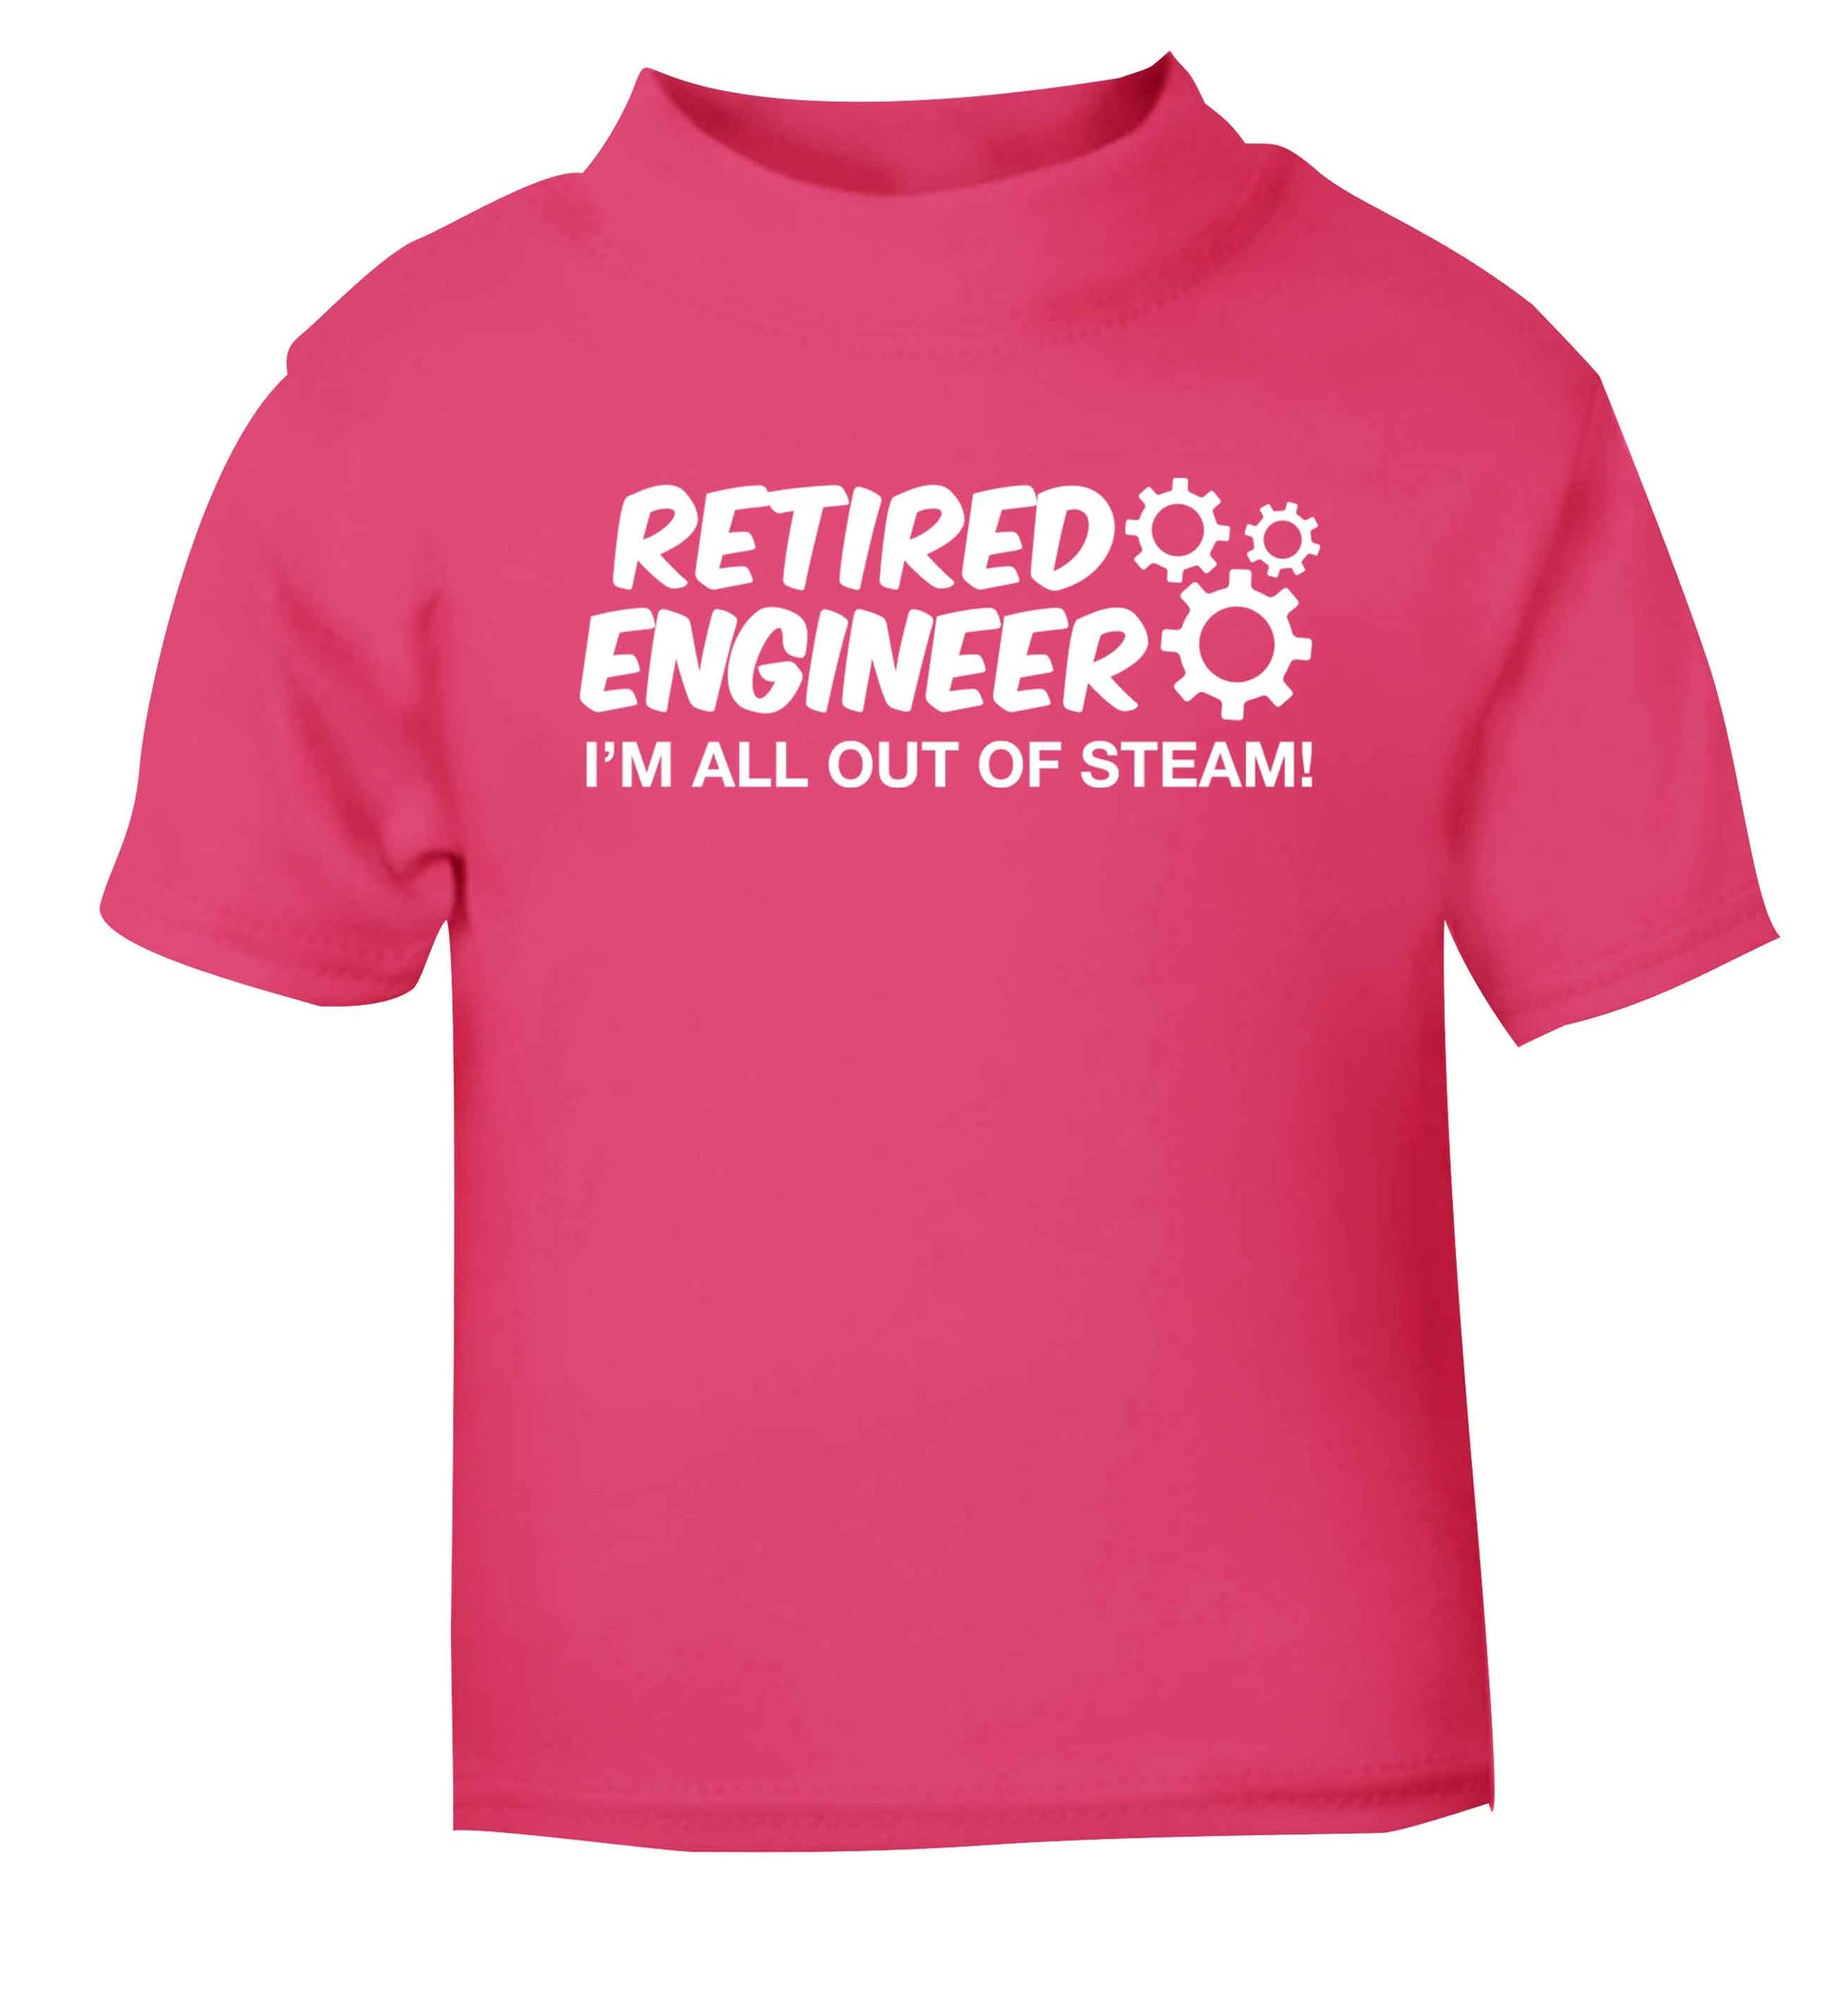 Retired engineer I'm all out of steam pink Baby Toddler Tshirt 2 Years